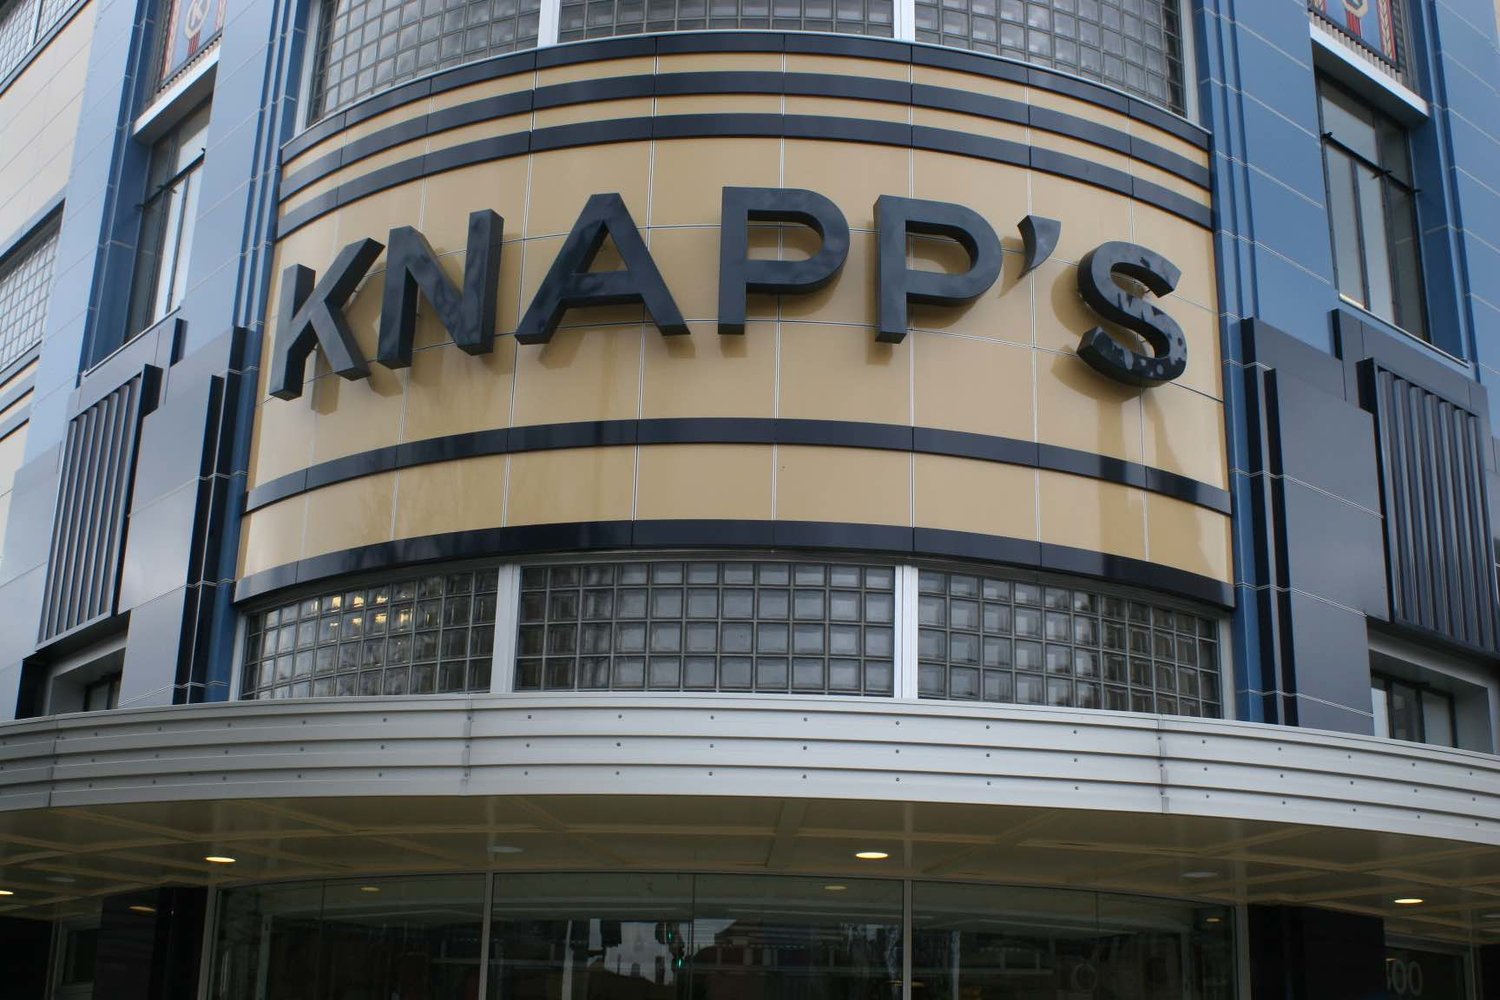 The old Knapp's Department Store will be the new, two-story home of the Lansing Art Gallery.